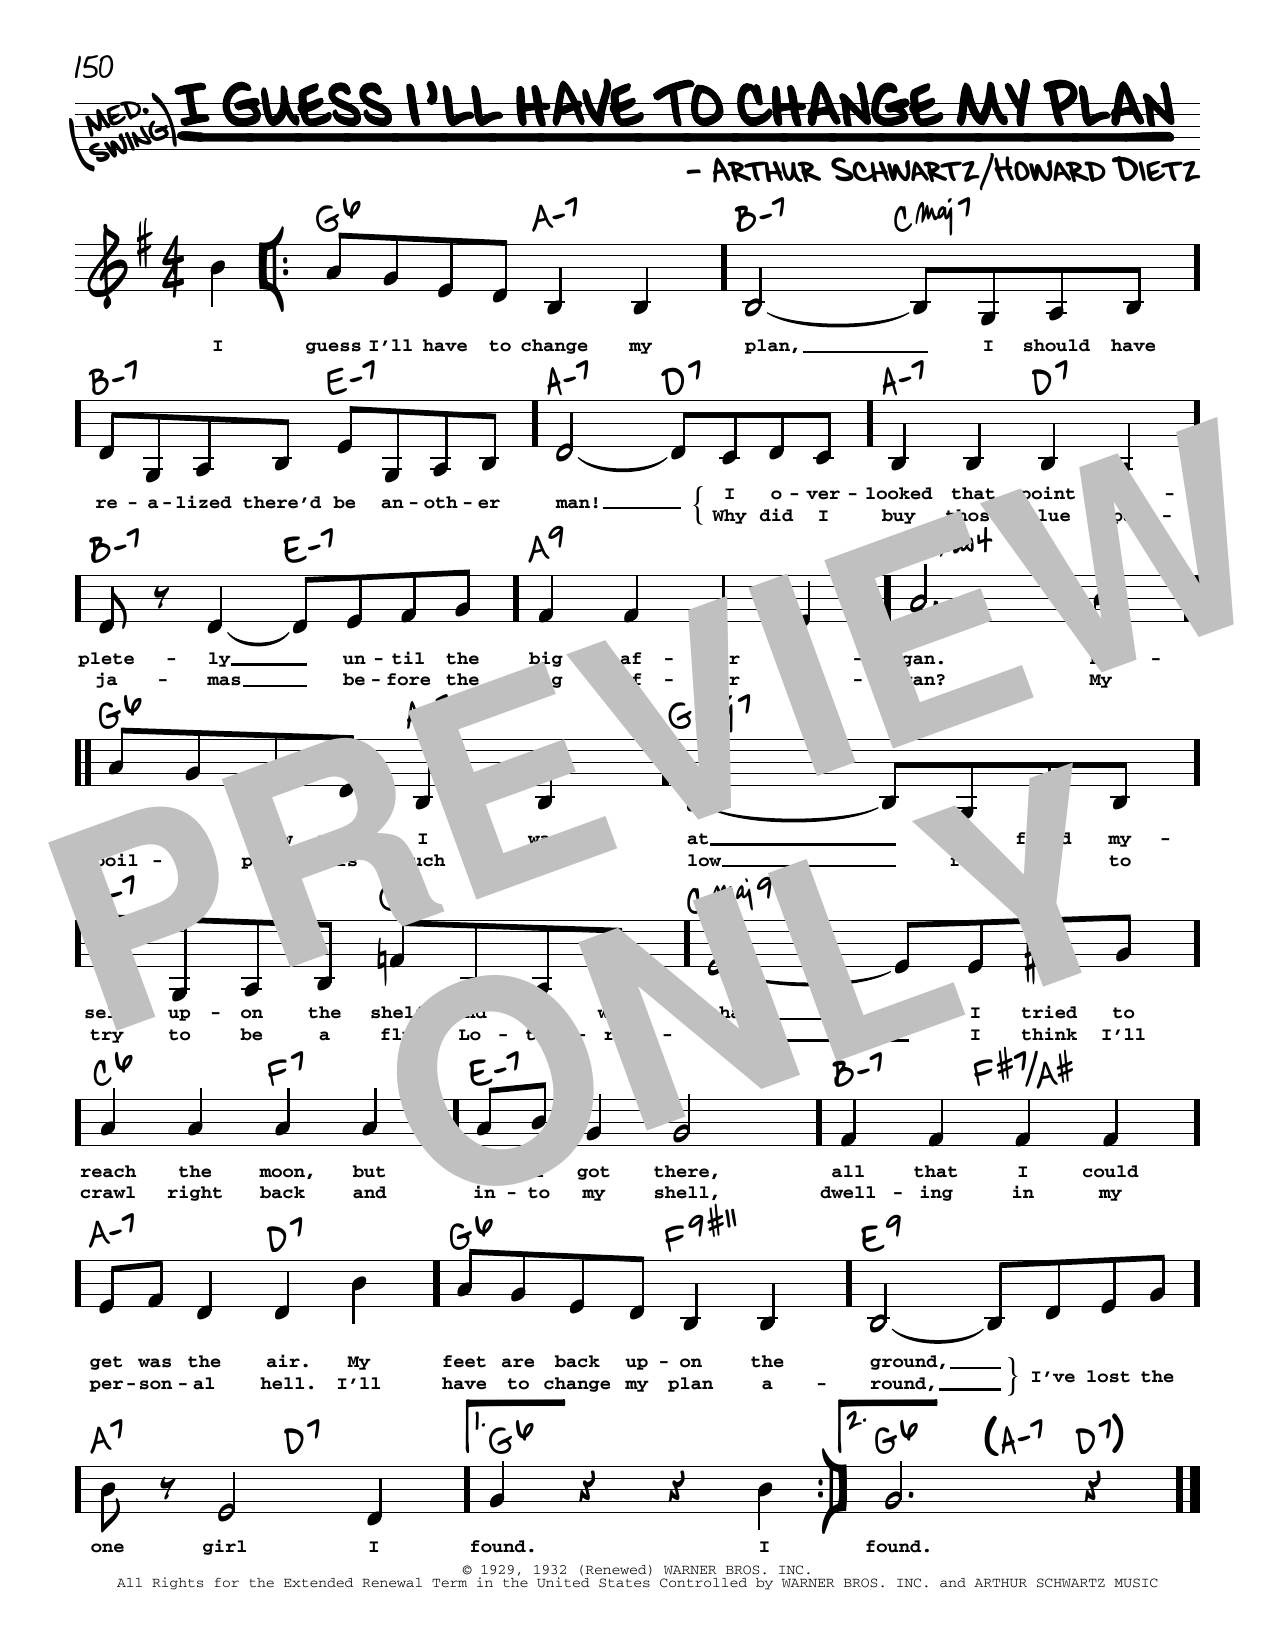 Howard Dietz I Guess I'll Have To Change My Plan (Low Voice) sheet music notes printable PDF score